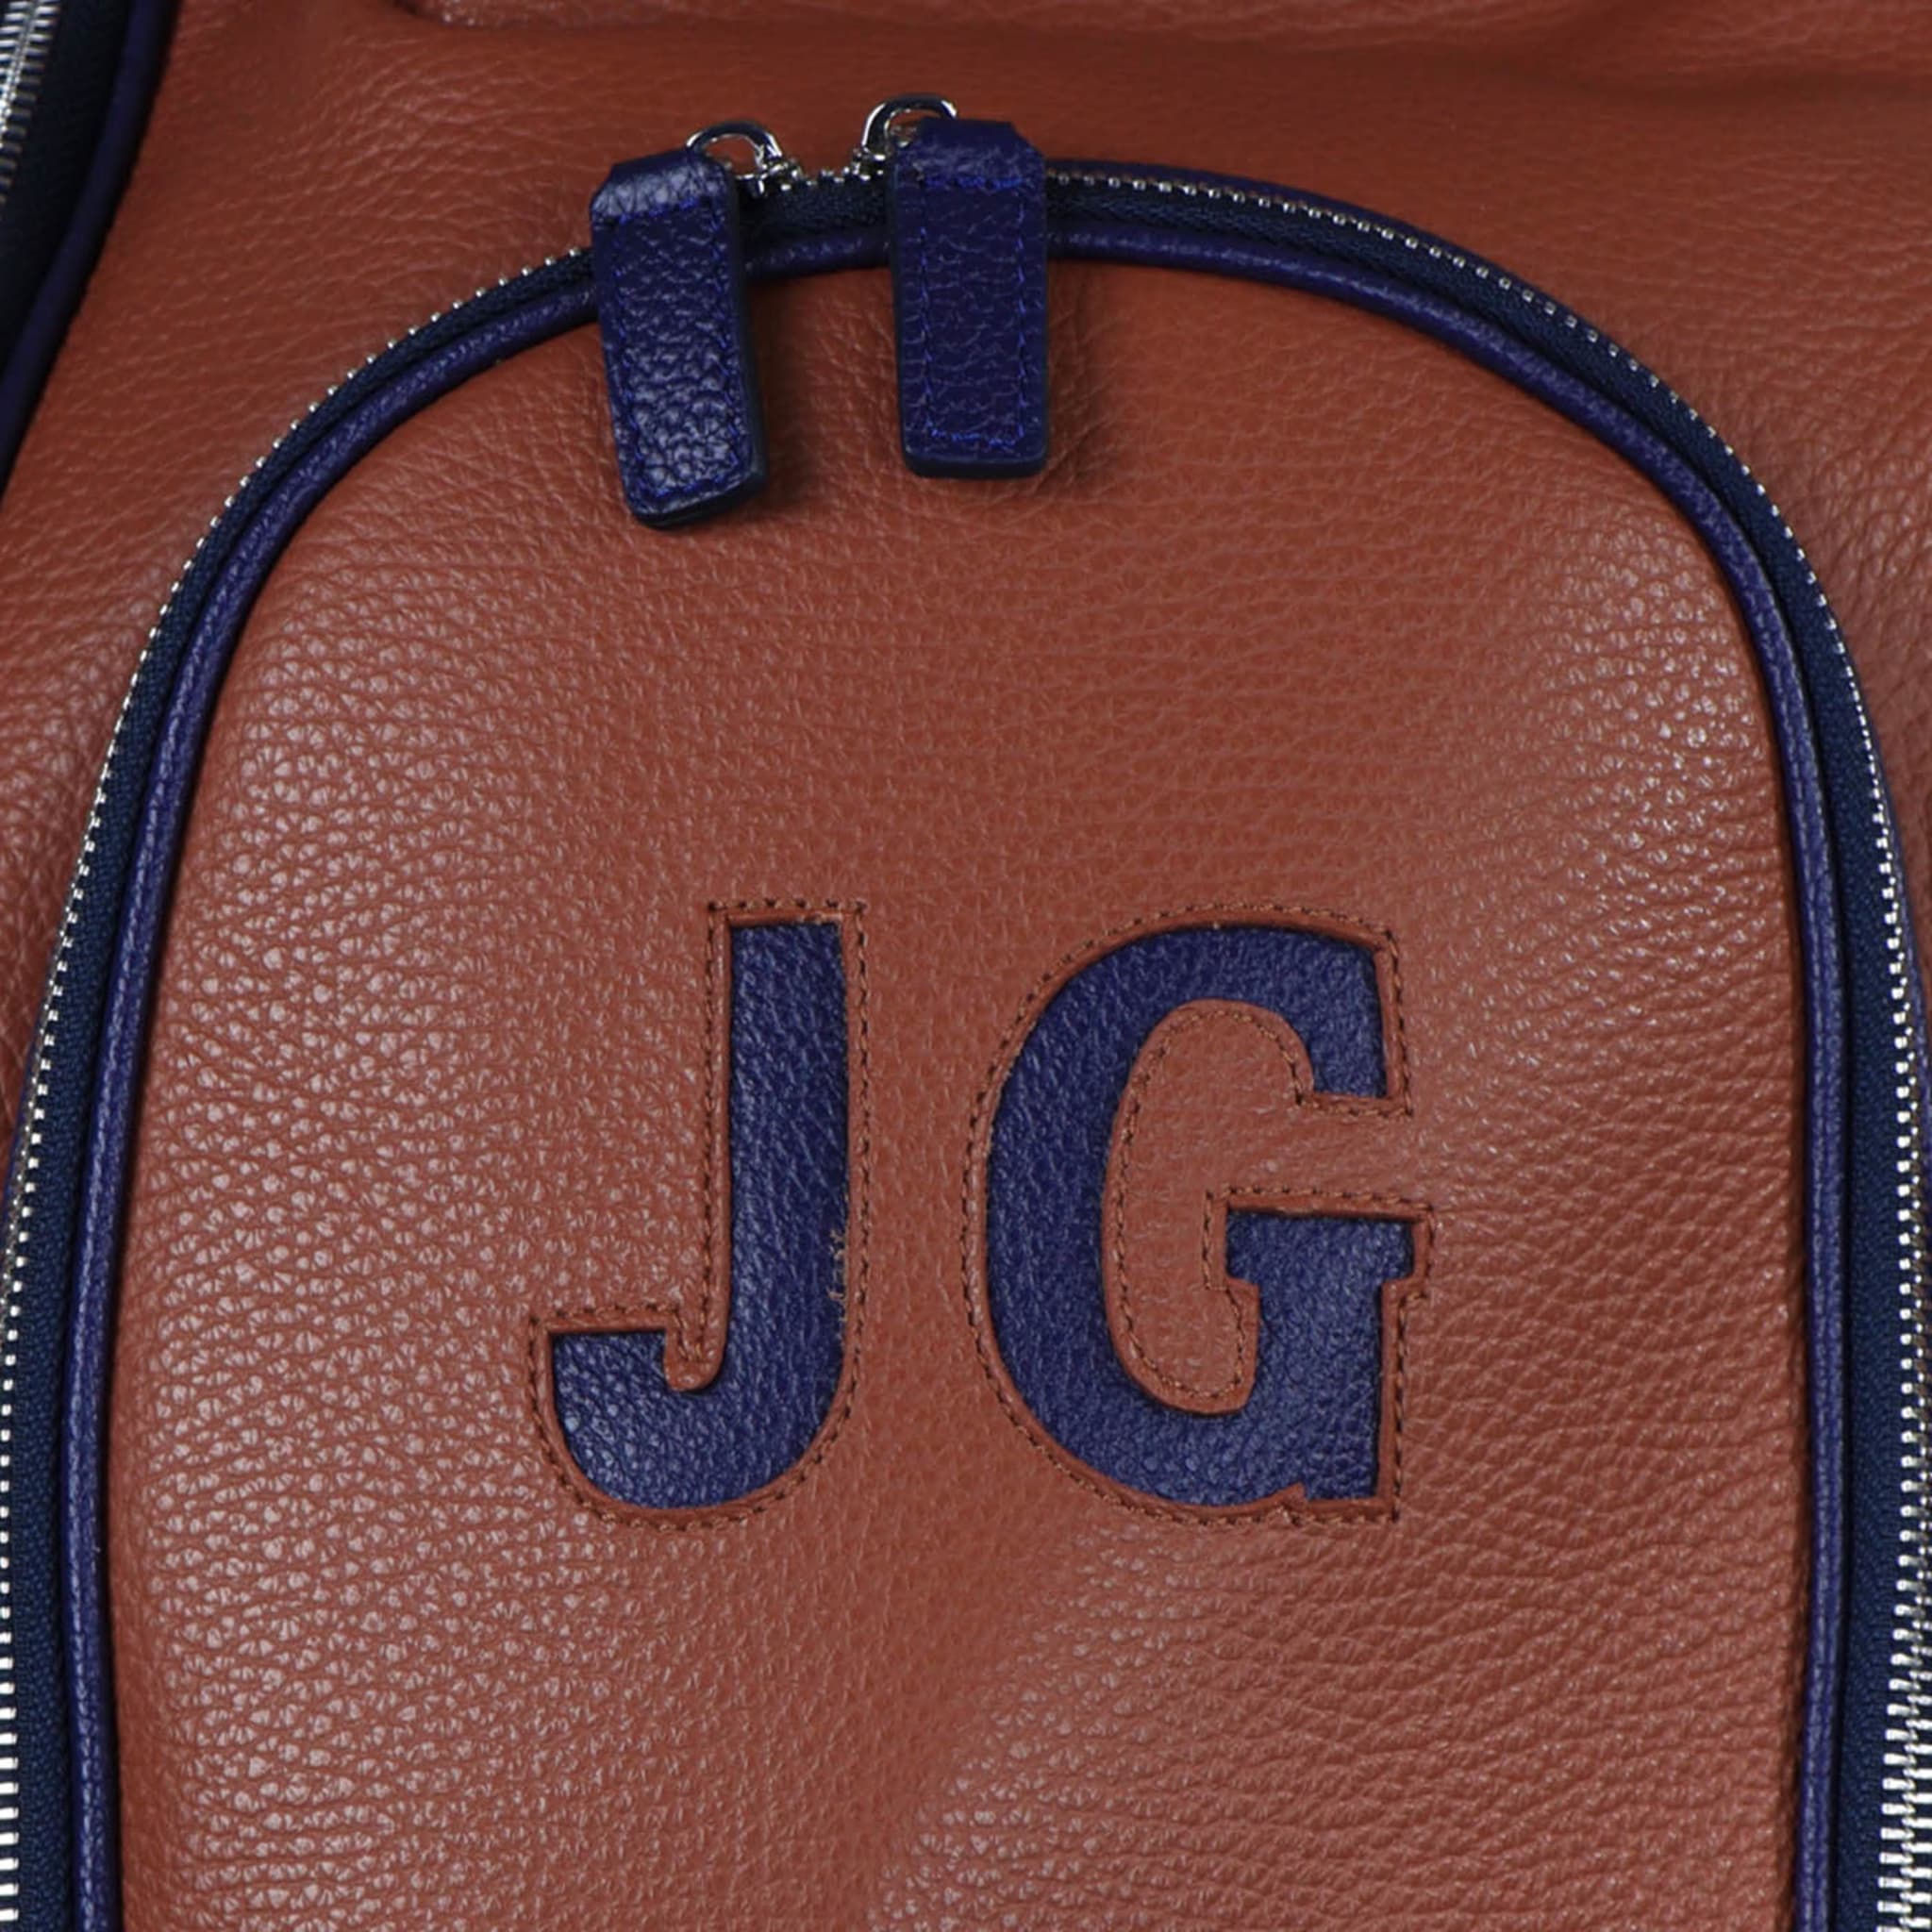 Imperiale Brown & Blue Leather Golf Bag - Alternative view 1